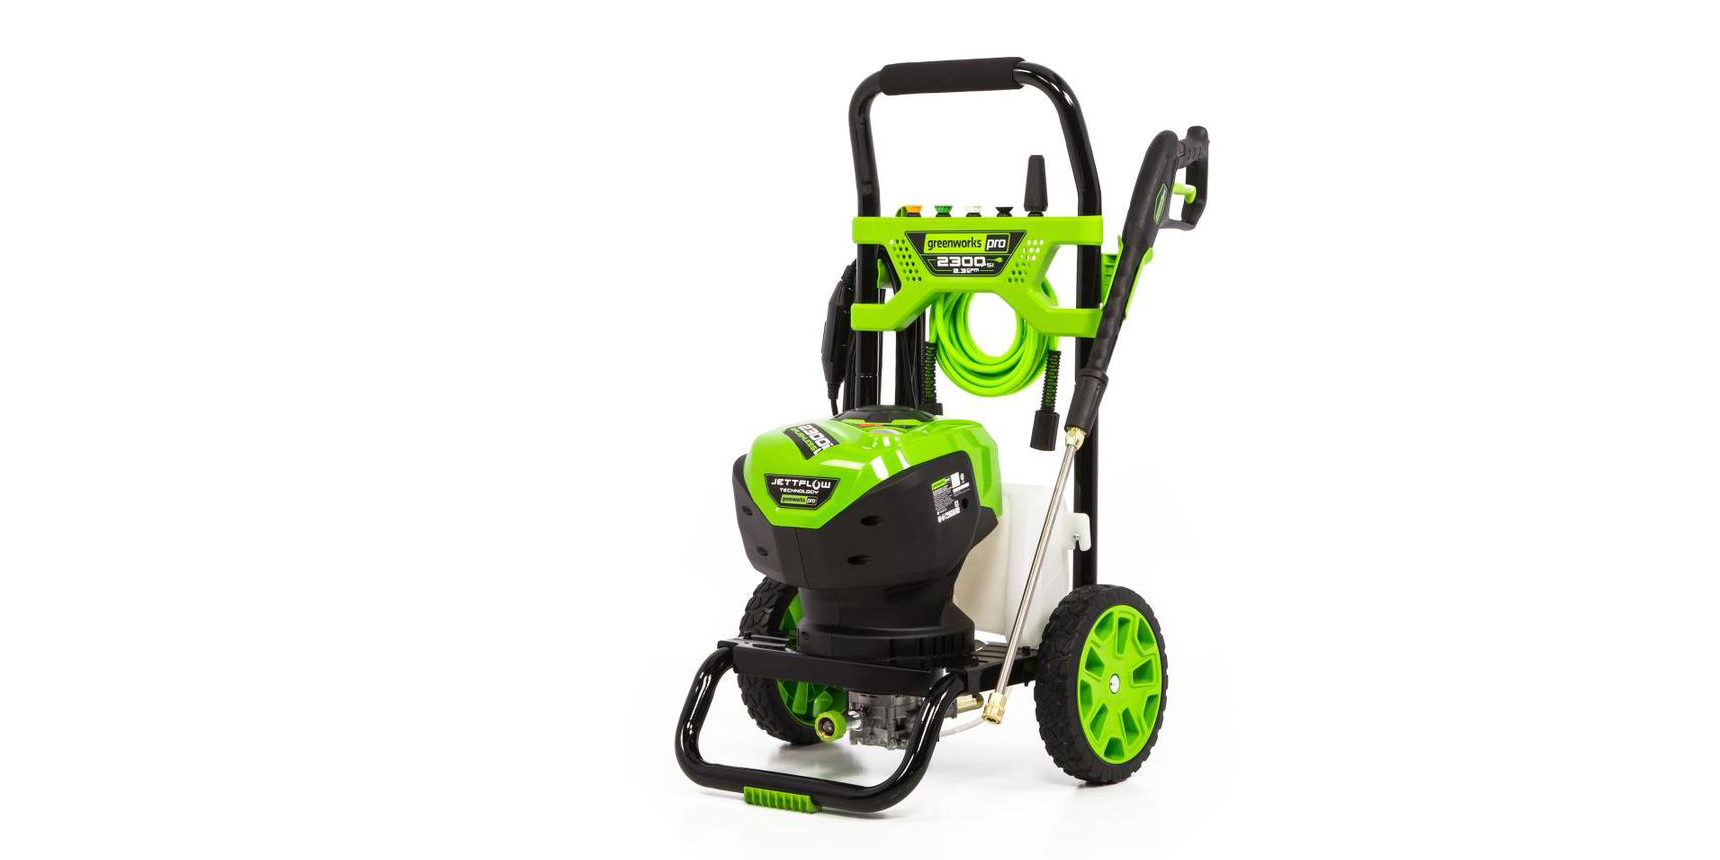 Pick up a Greenworks Pro Electric Pressure Washer for 33% off, Sylvania LED bulbs and more in today’s Green Deals